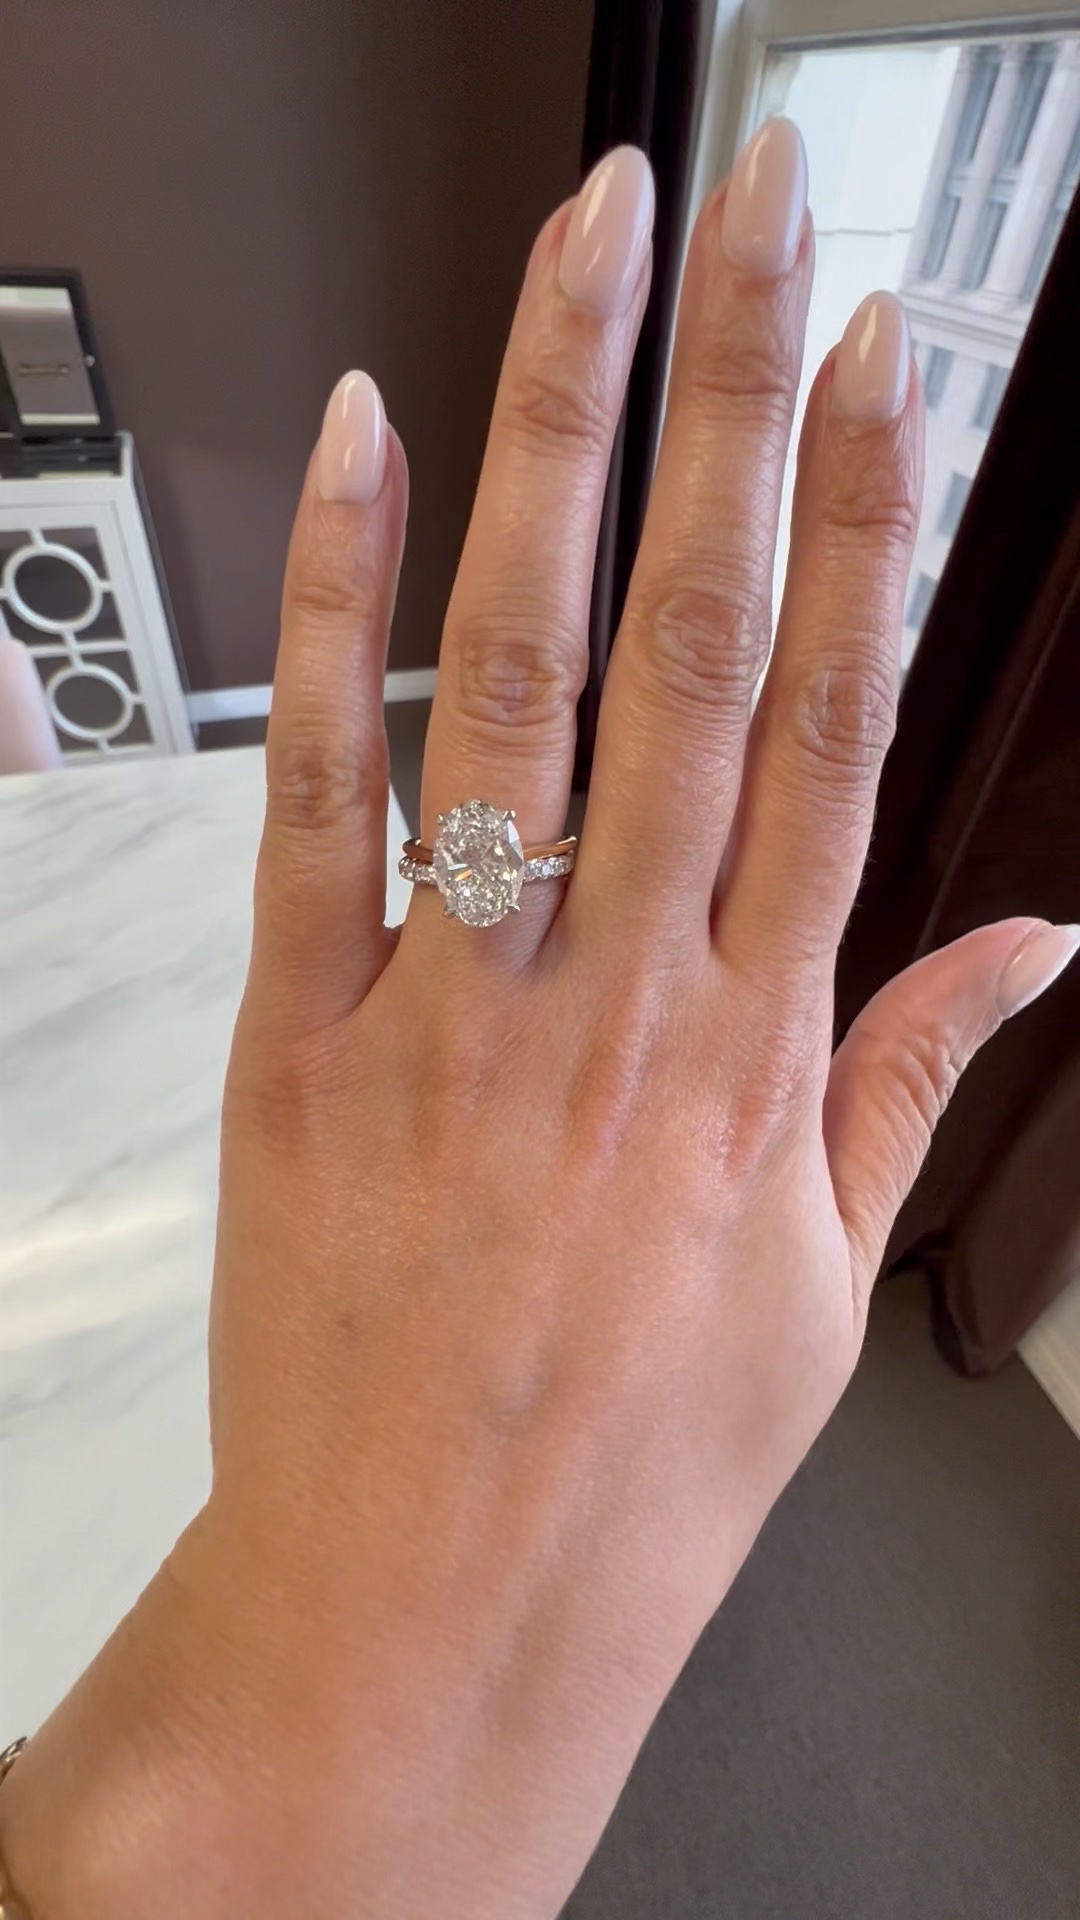 How Should Your Engagement Ring Fit?